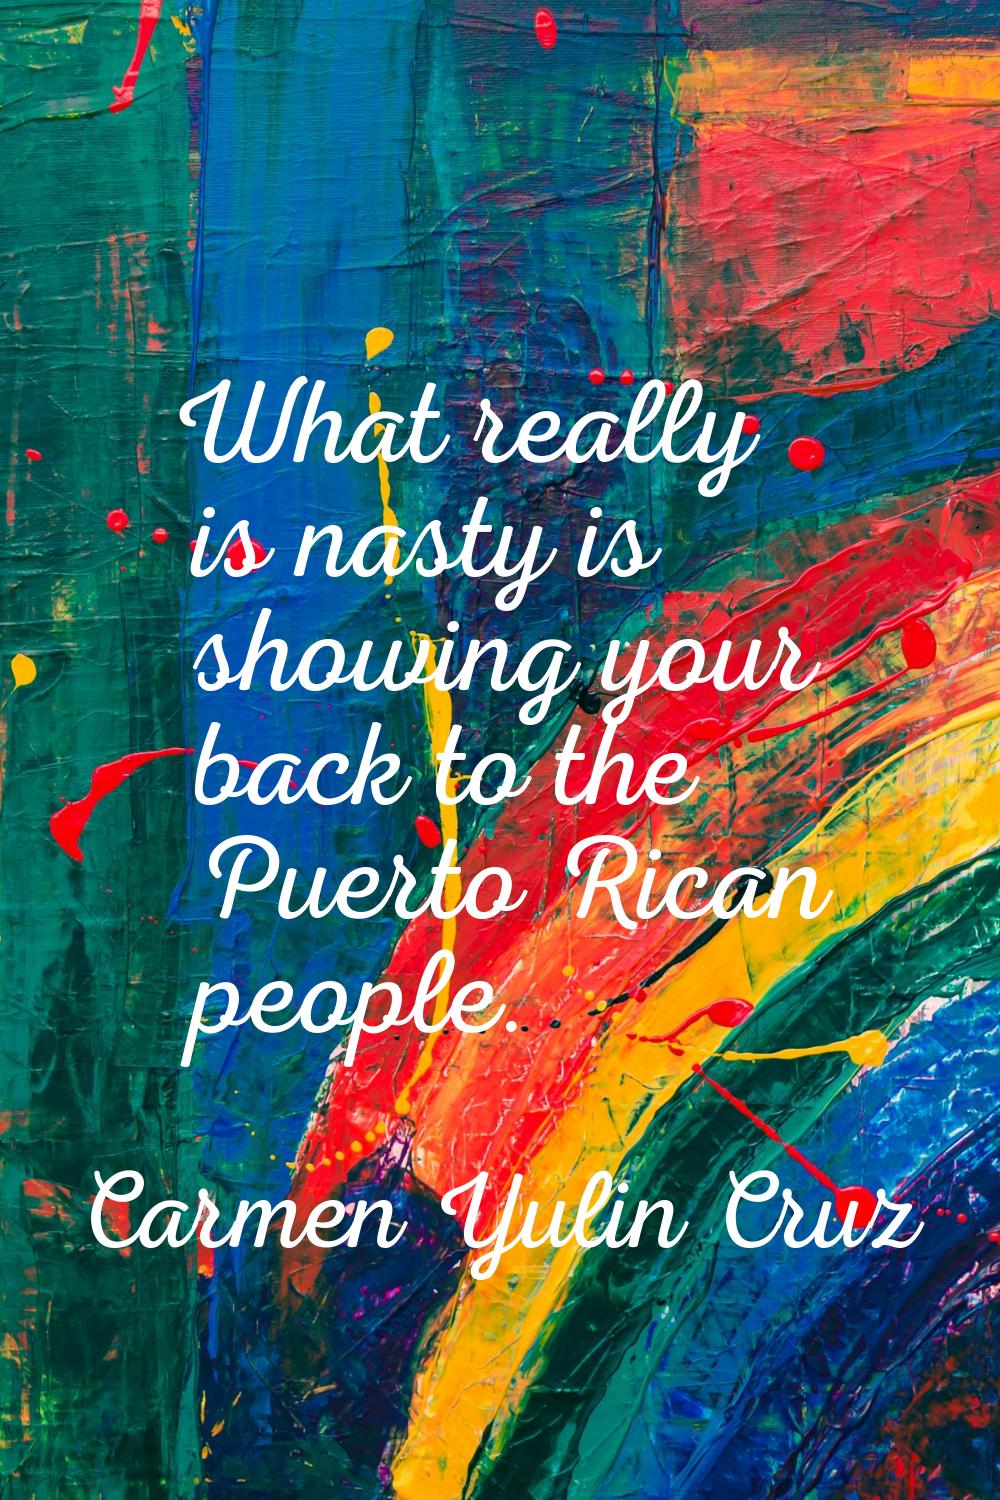 What really is nasty is showing your back to the Puerto Rican people.